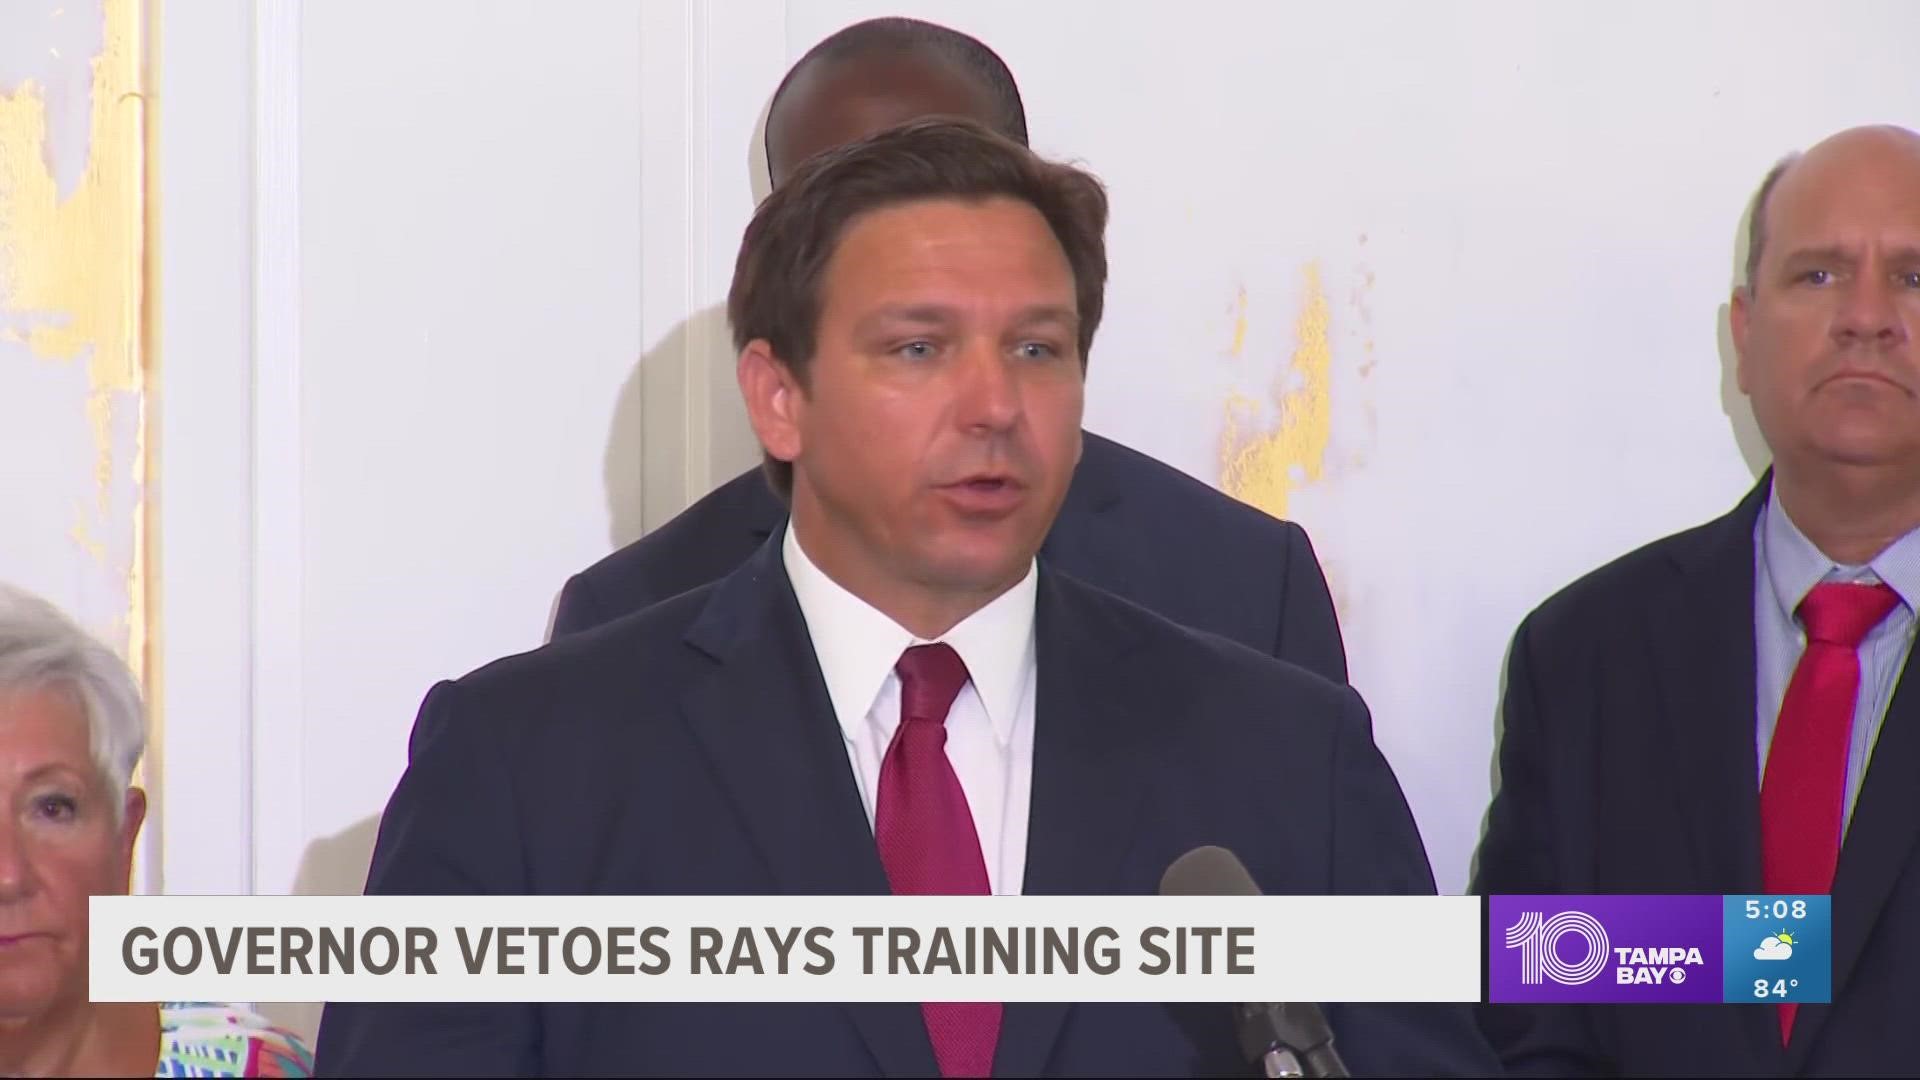 Speaking to reporters Friday, Gov. DeSantis signaled he already planned to veto the funding before the Tampa Bay Rays tweeted about gun violence.